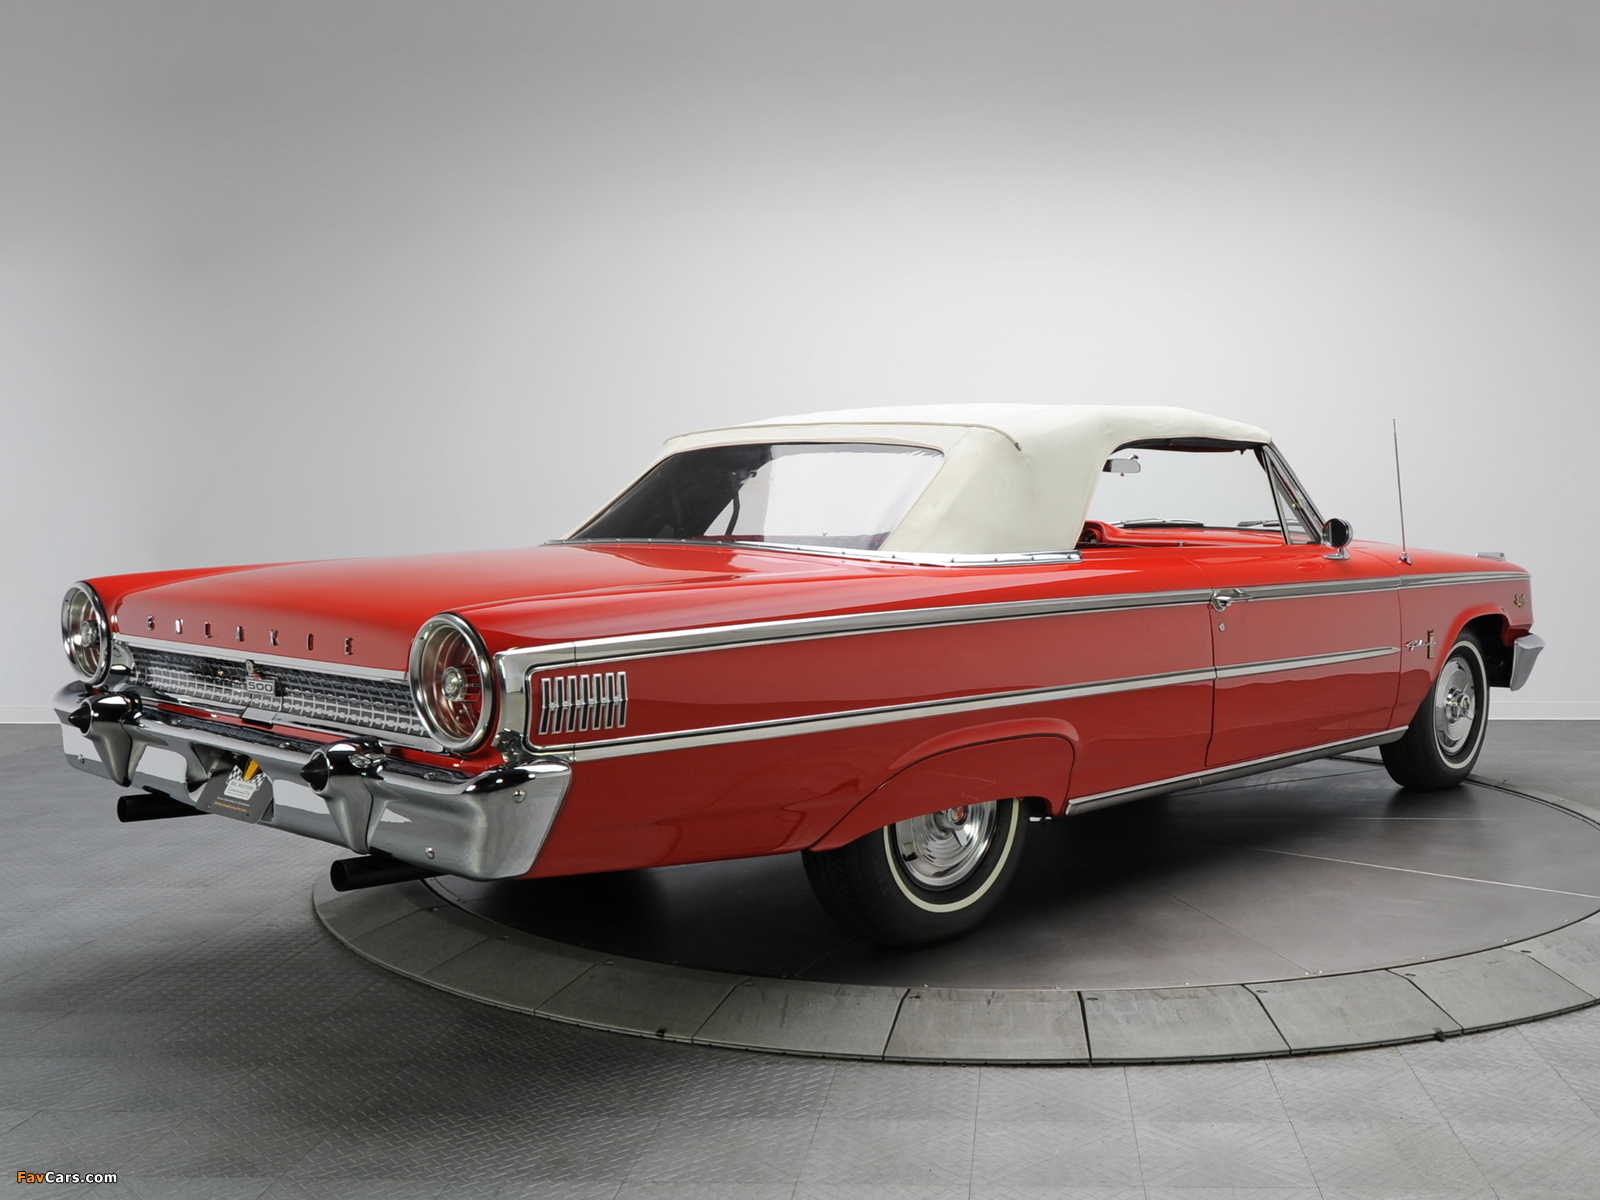 Ford Galaxie 500 Sunliner (65) 1963 pictures (1600 x 1200)